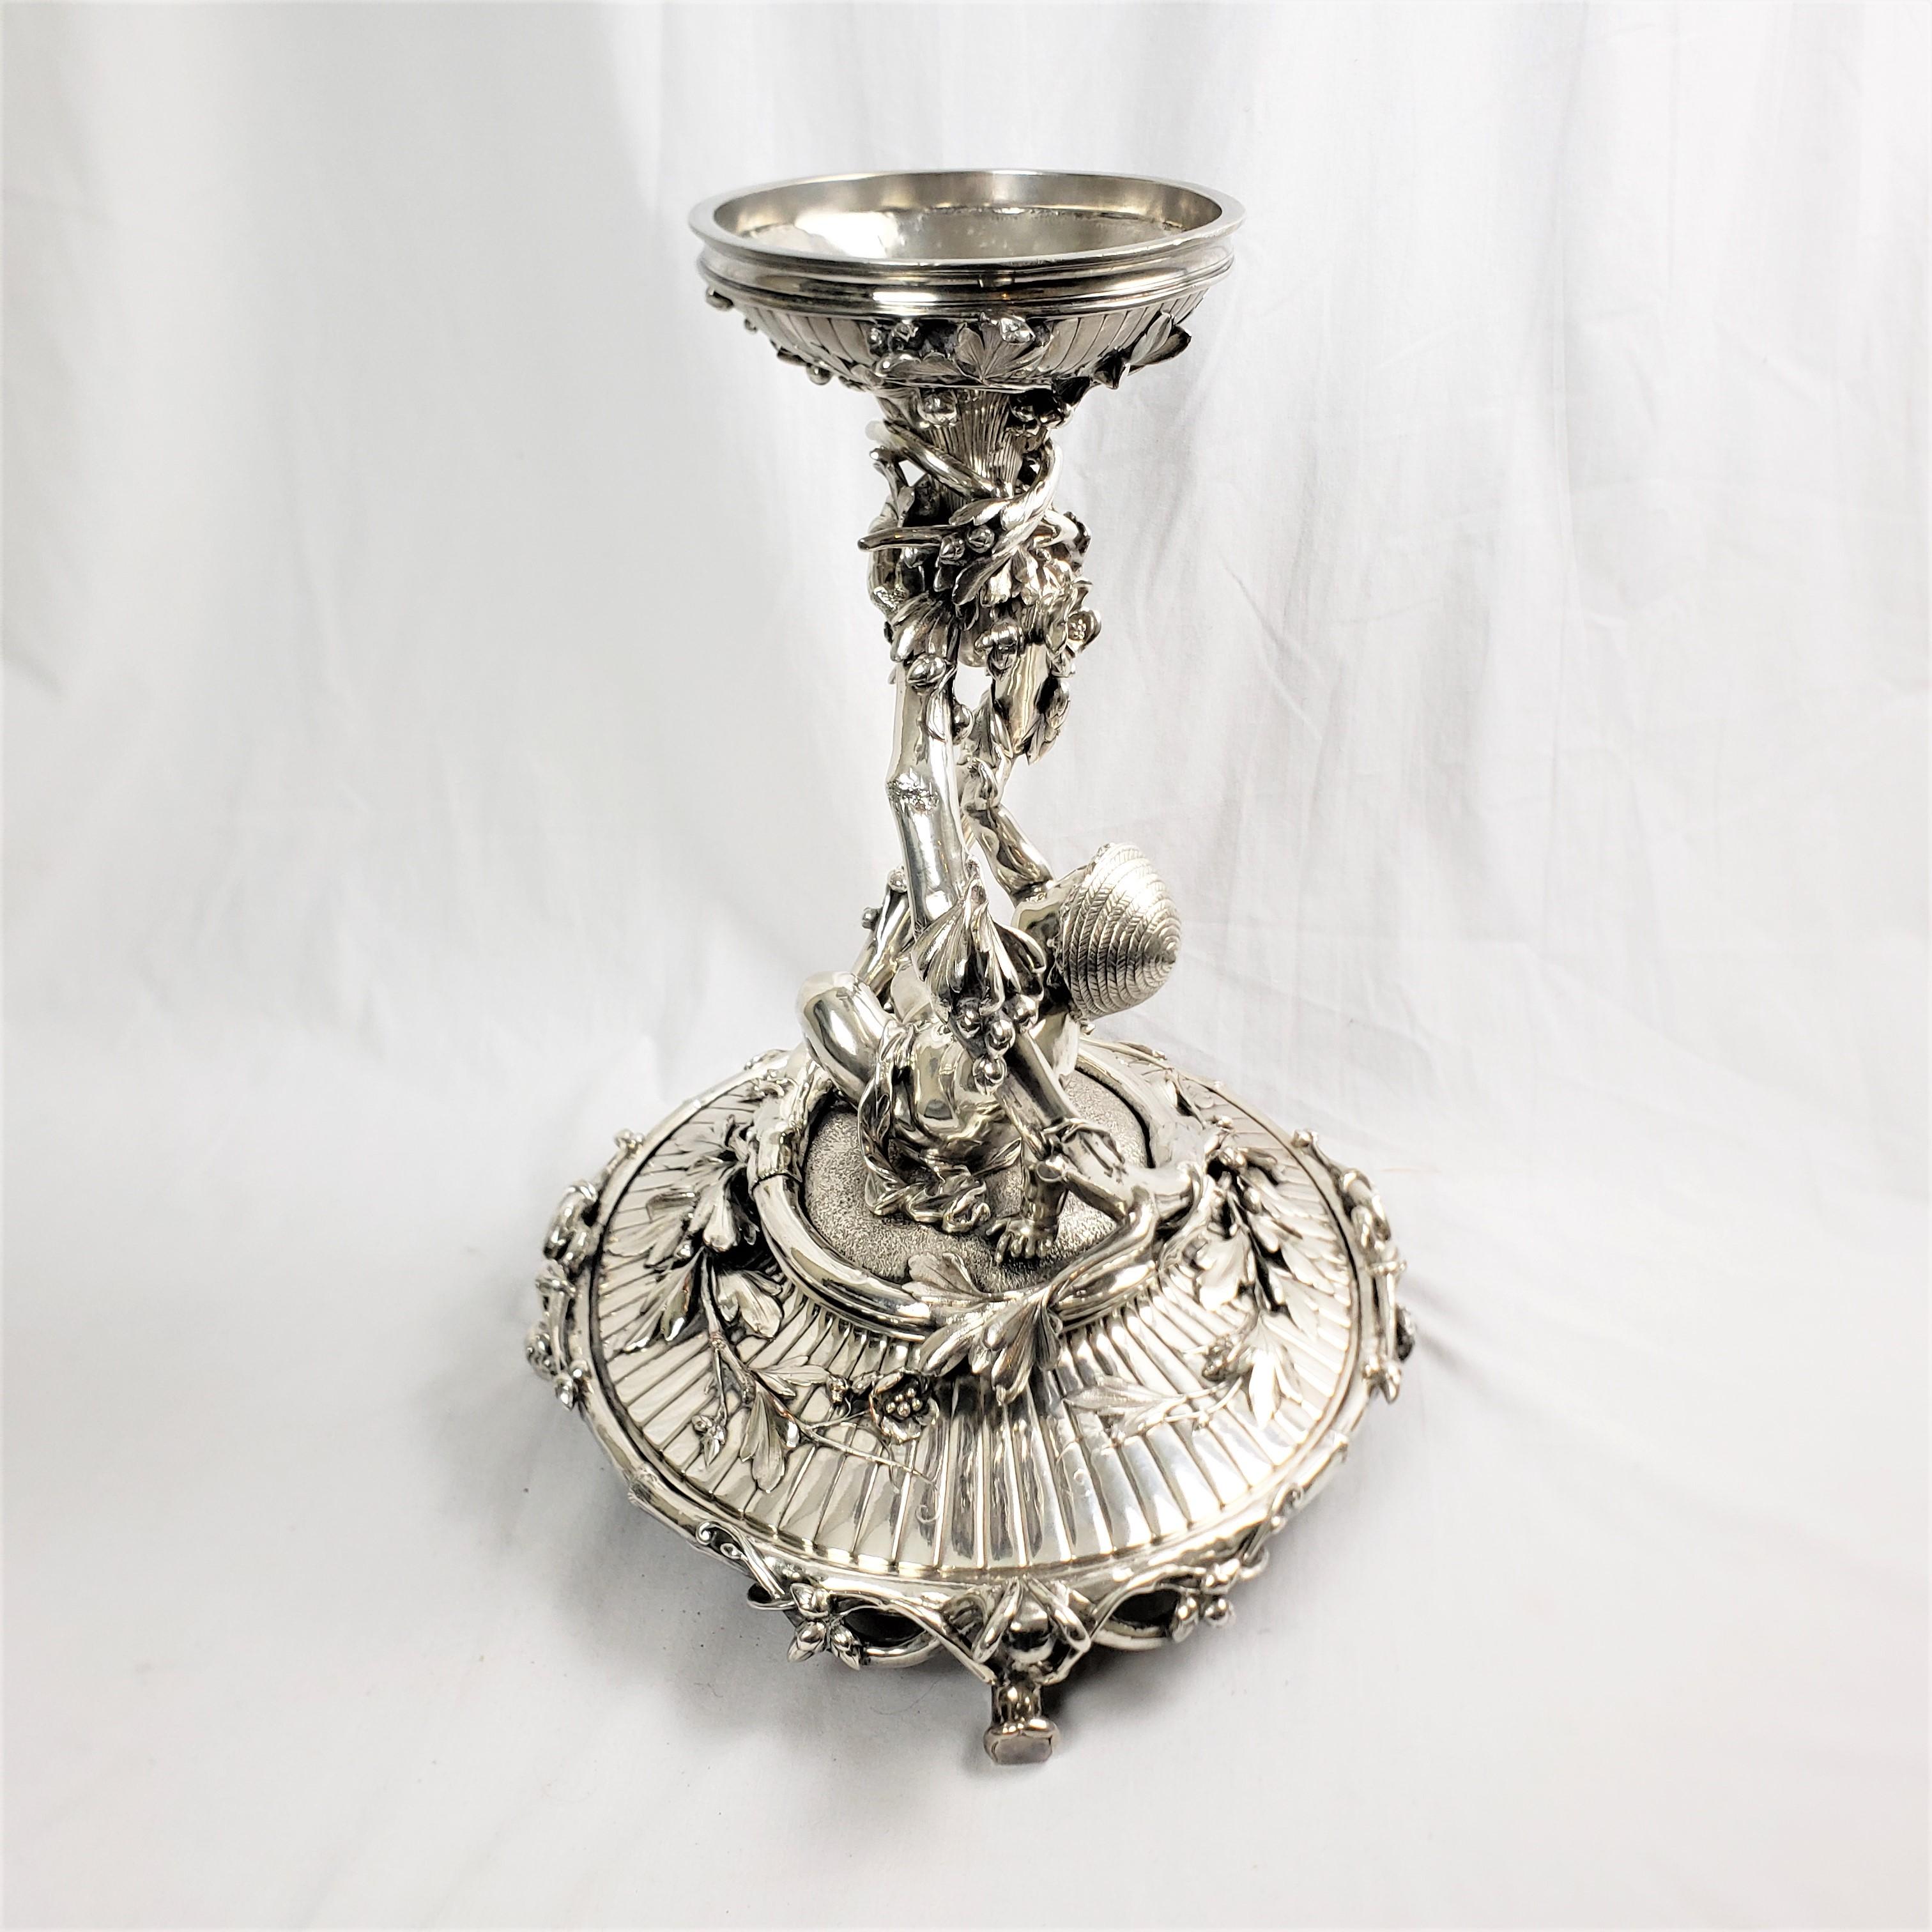 High Victorian Huge Antique Christofle Silver Plated Centerpiece with a Figural Reclining Child For Sale